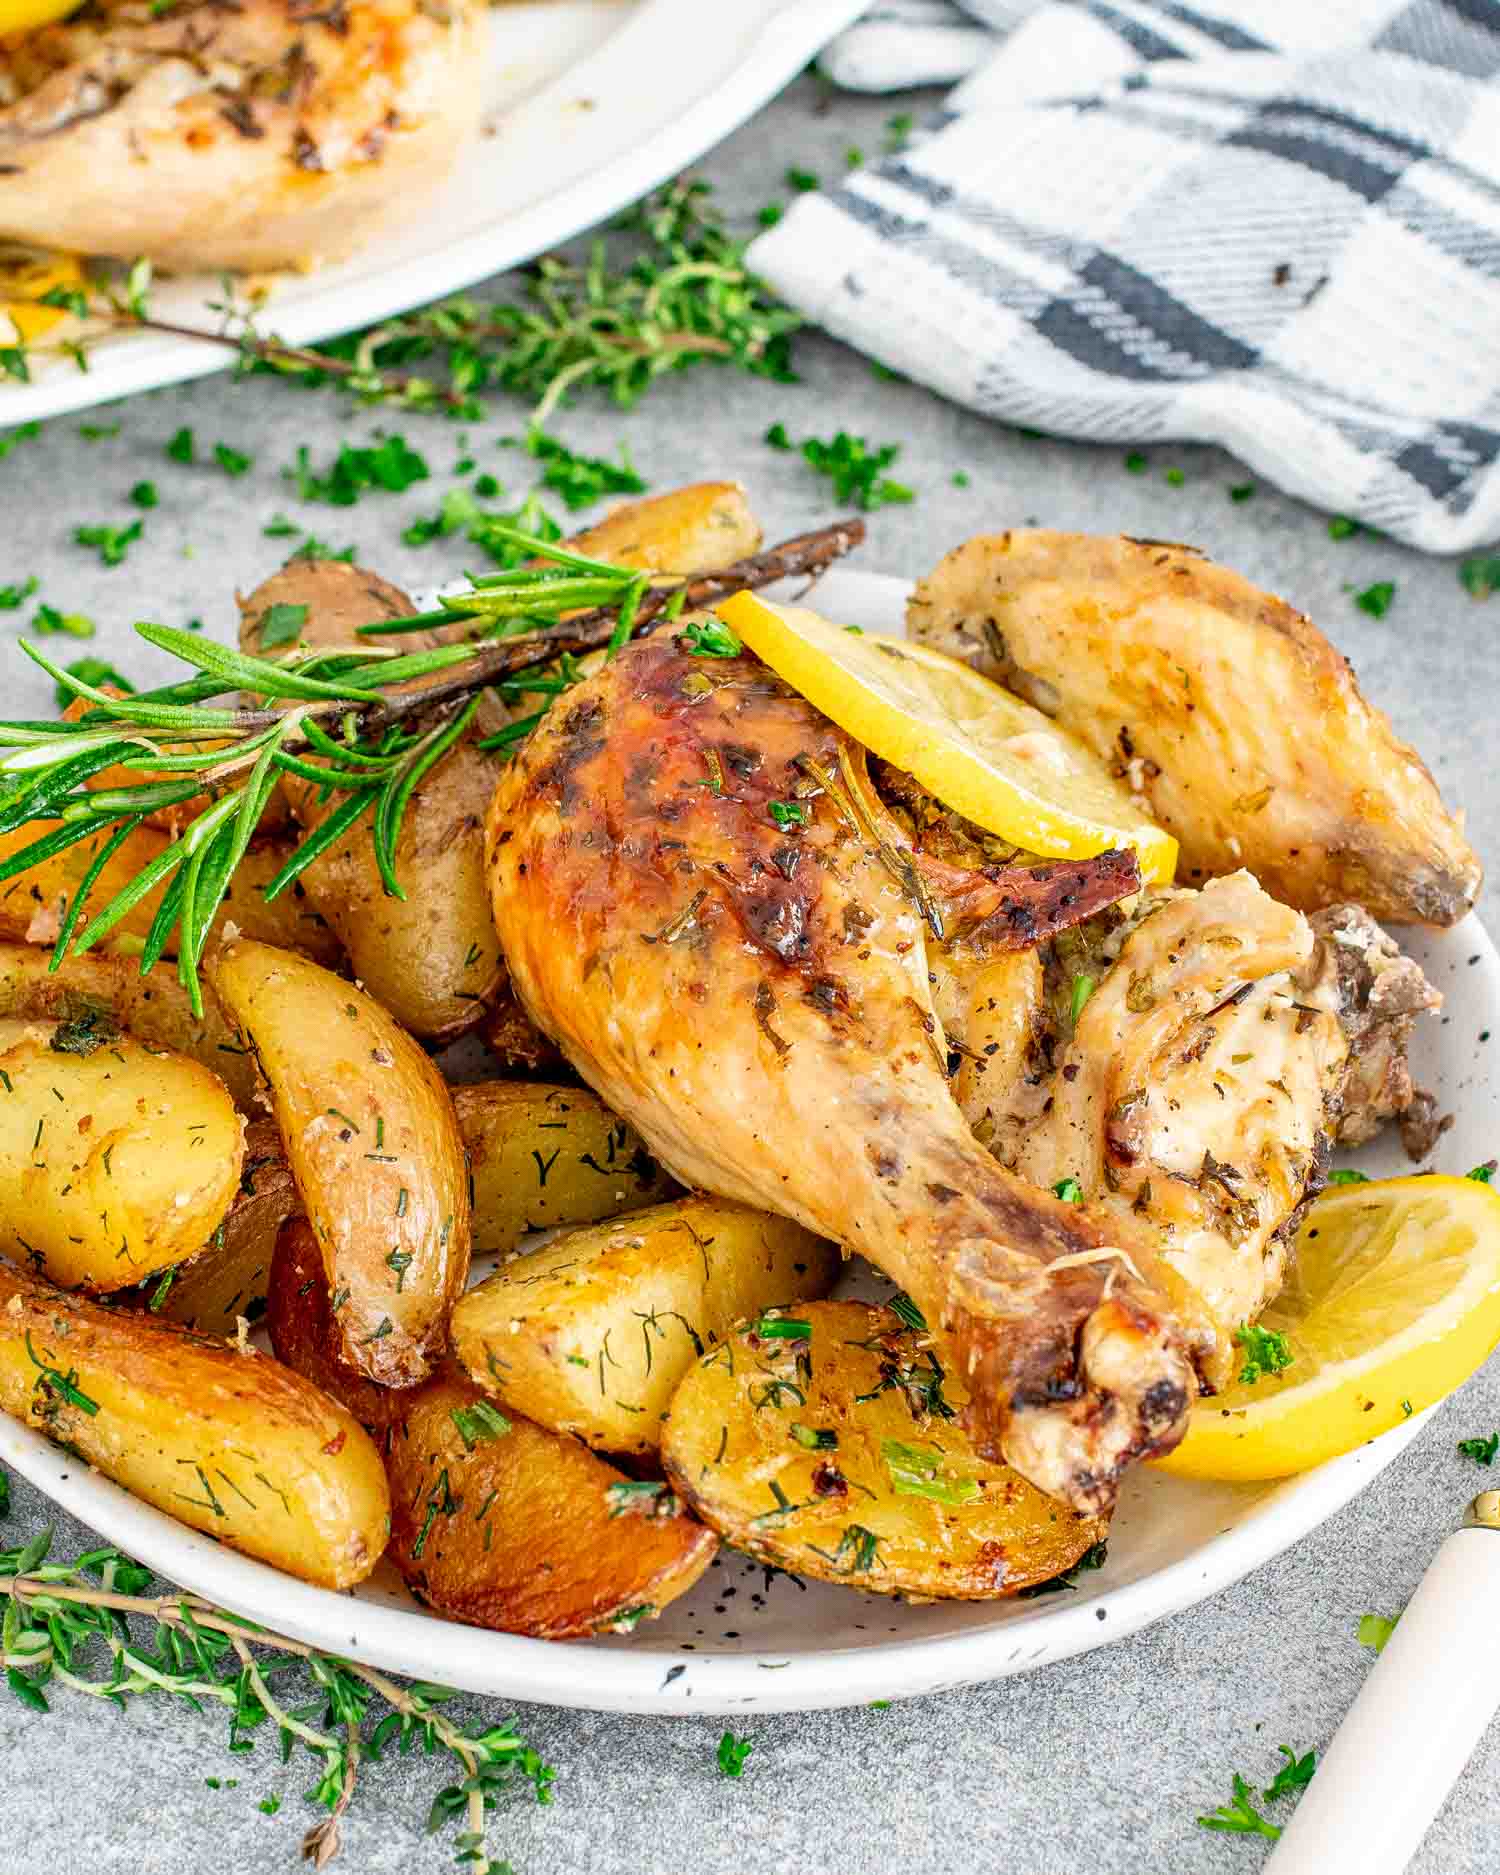 a serving of lemon garlic chicken on a plate along with some roasted potatoes.